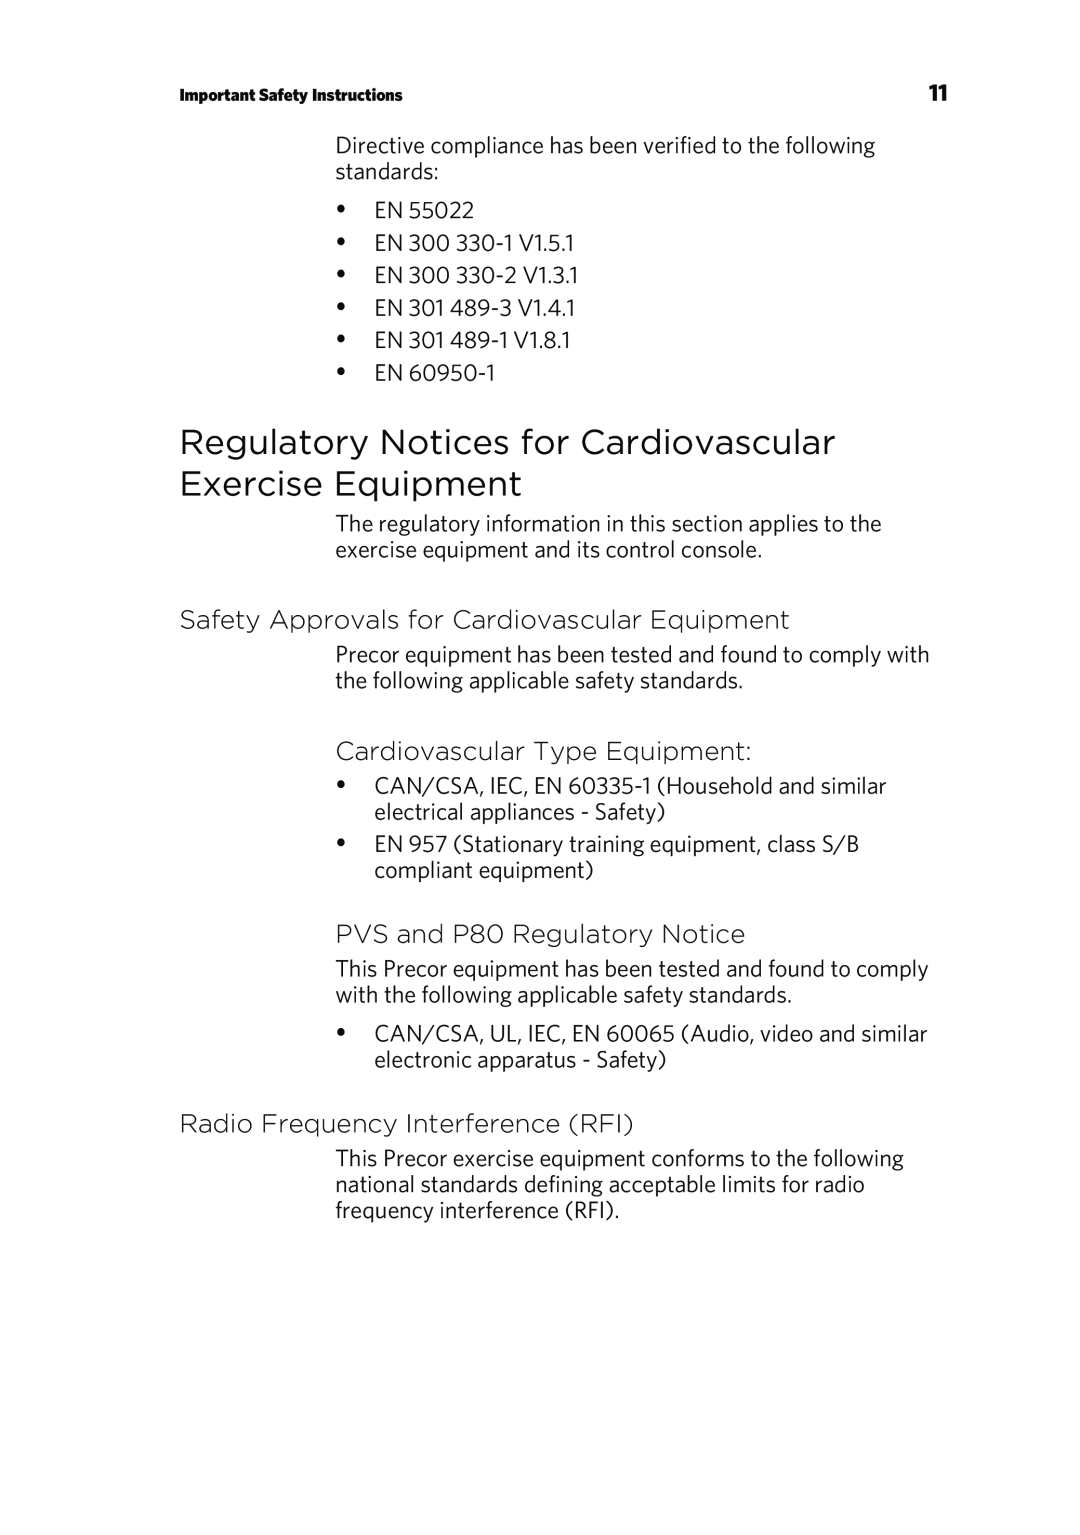 Precor Safety Approvals for Cardiovascular Equipment, Cardiovascular Type Equipment, PVS and P80 Regulatory Notice 